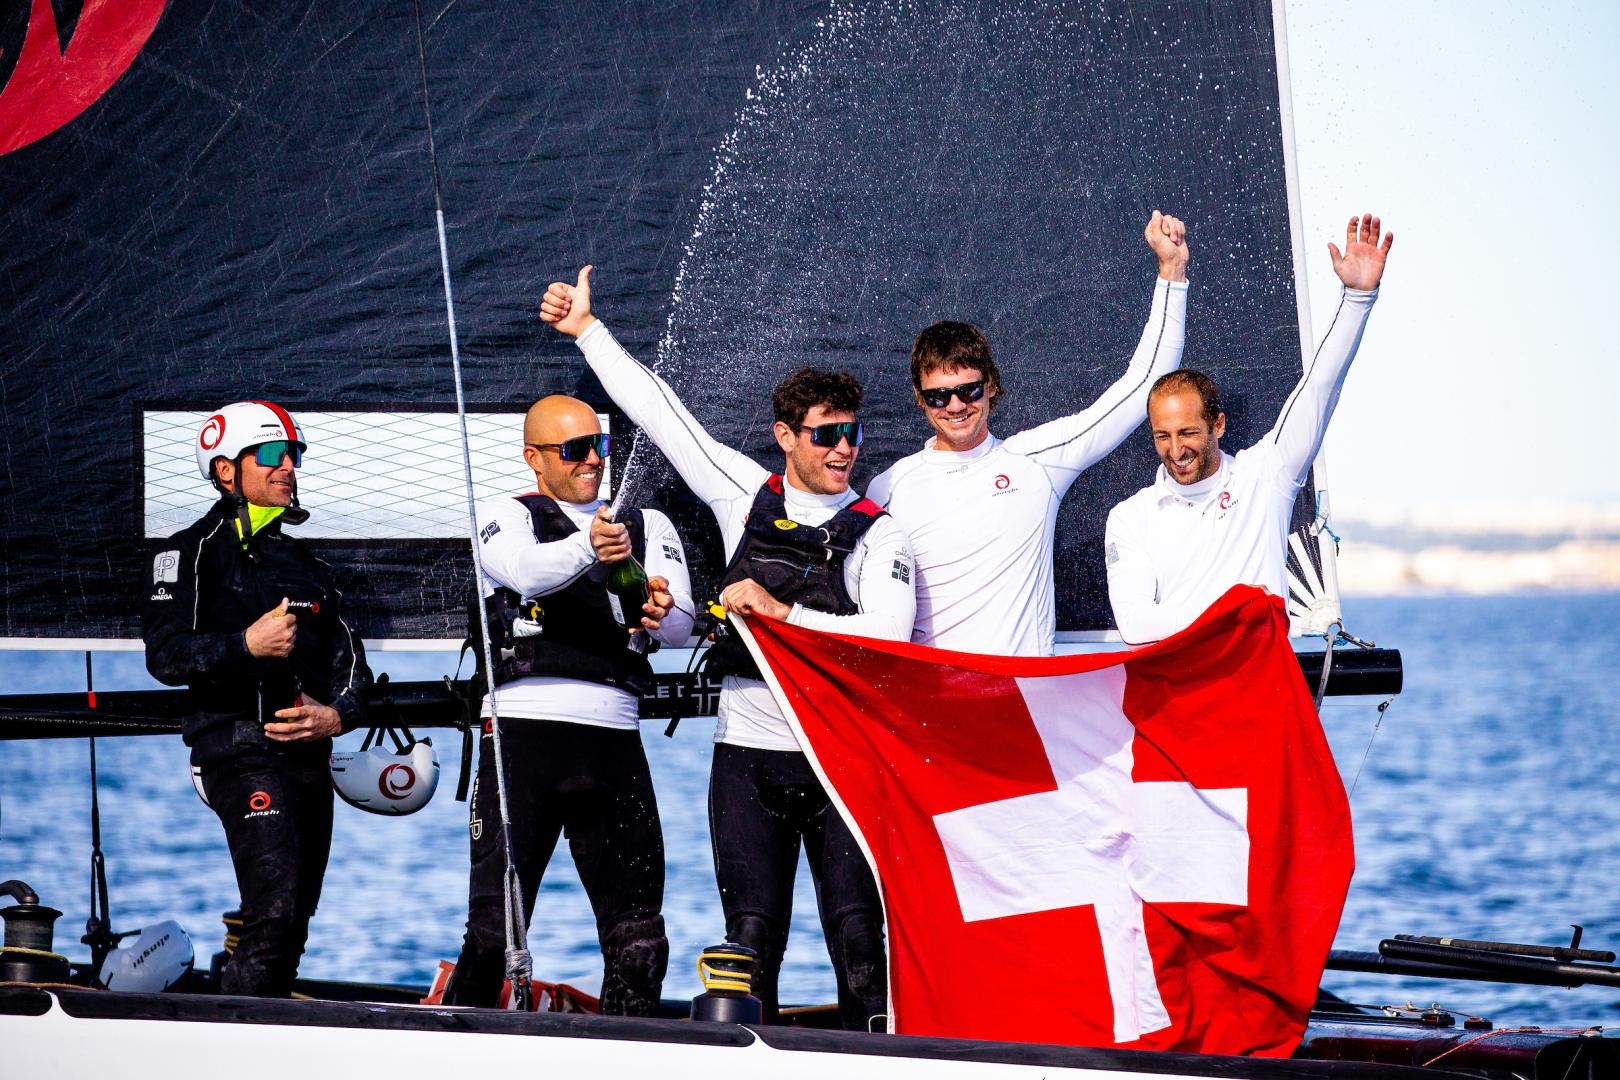 Alinghi - GC32 Racing Tour champions again - left to right: Nicolas Charbonnier, Yves Detrey, Timothe Lapauw, Bryan Mettraux and Arnaud Psarofaghis.